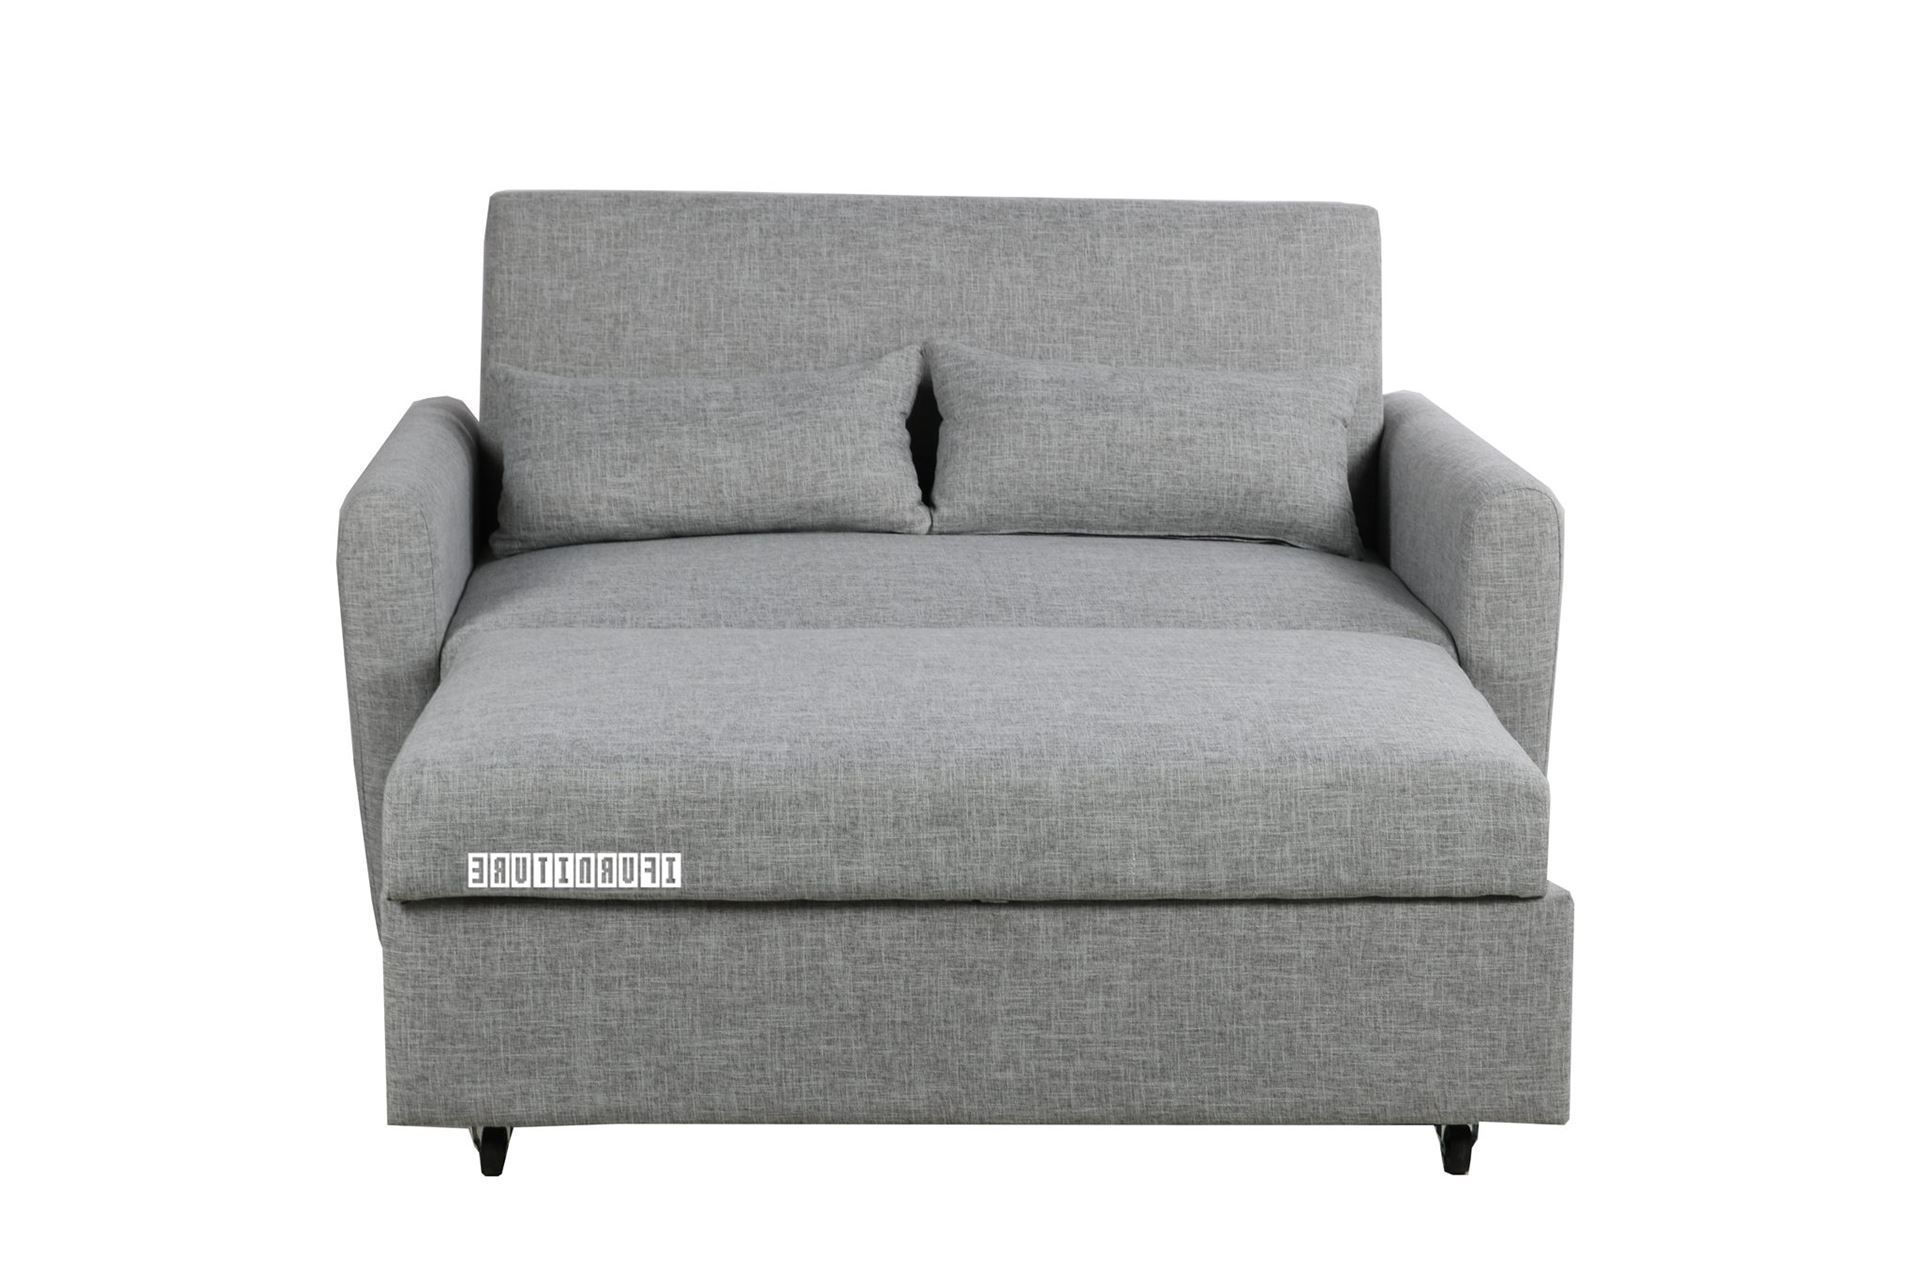 Primo Pull Out 2 Seater Sofa Bed (grey) Pertaining To 2 In 1 Gray Pull Out Sofa Beds (View 5 of 20)